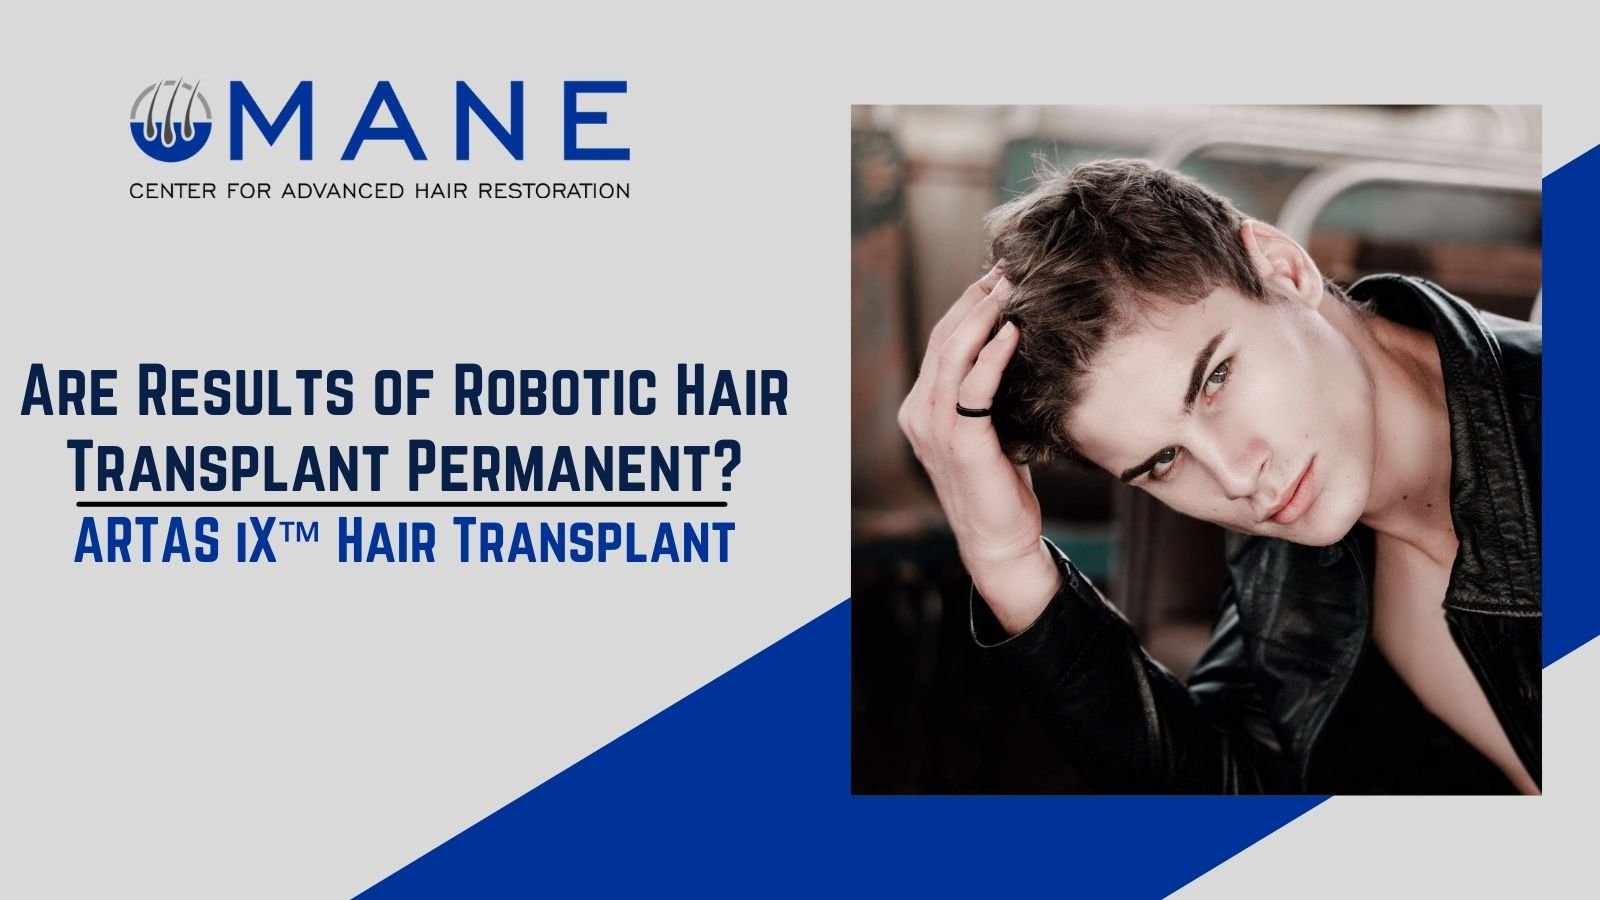 Are Results of Robotic Hair Transplant Permanent?